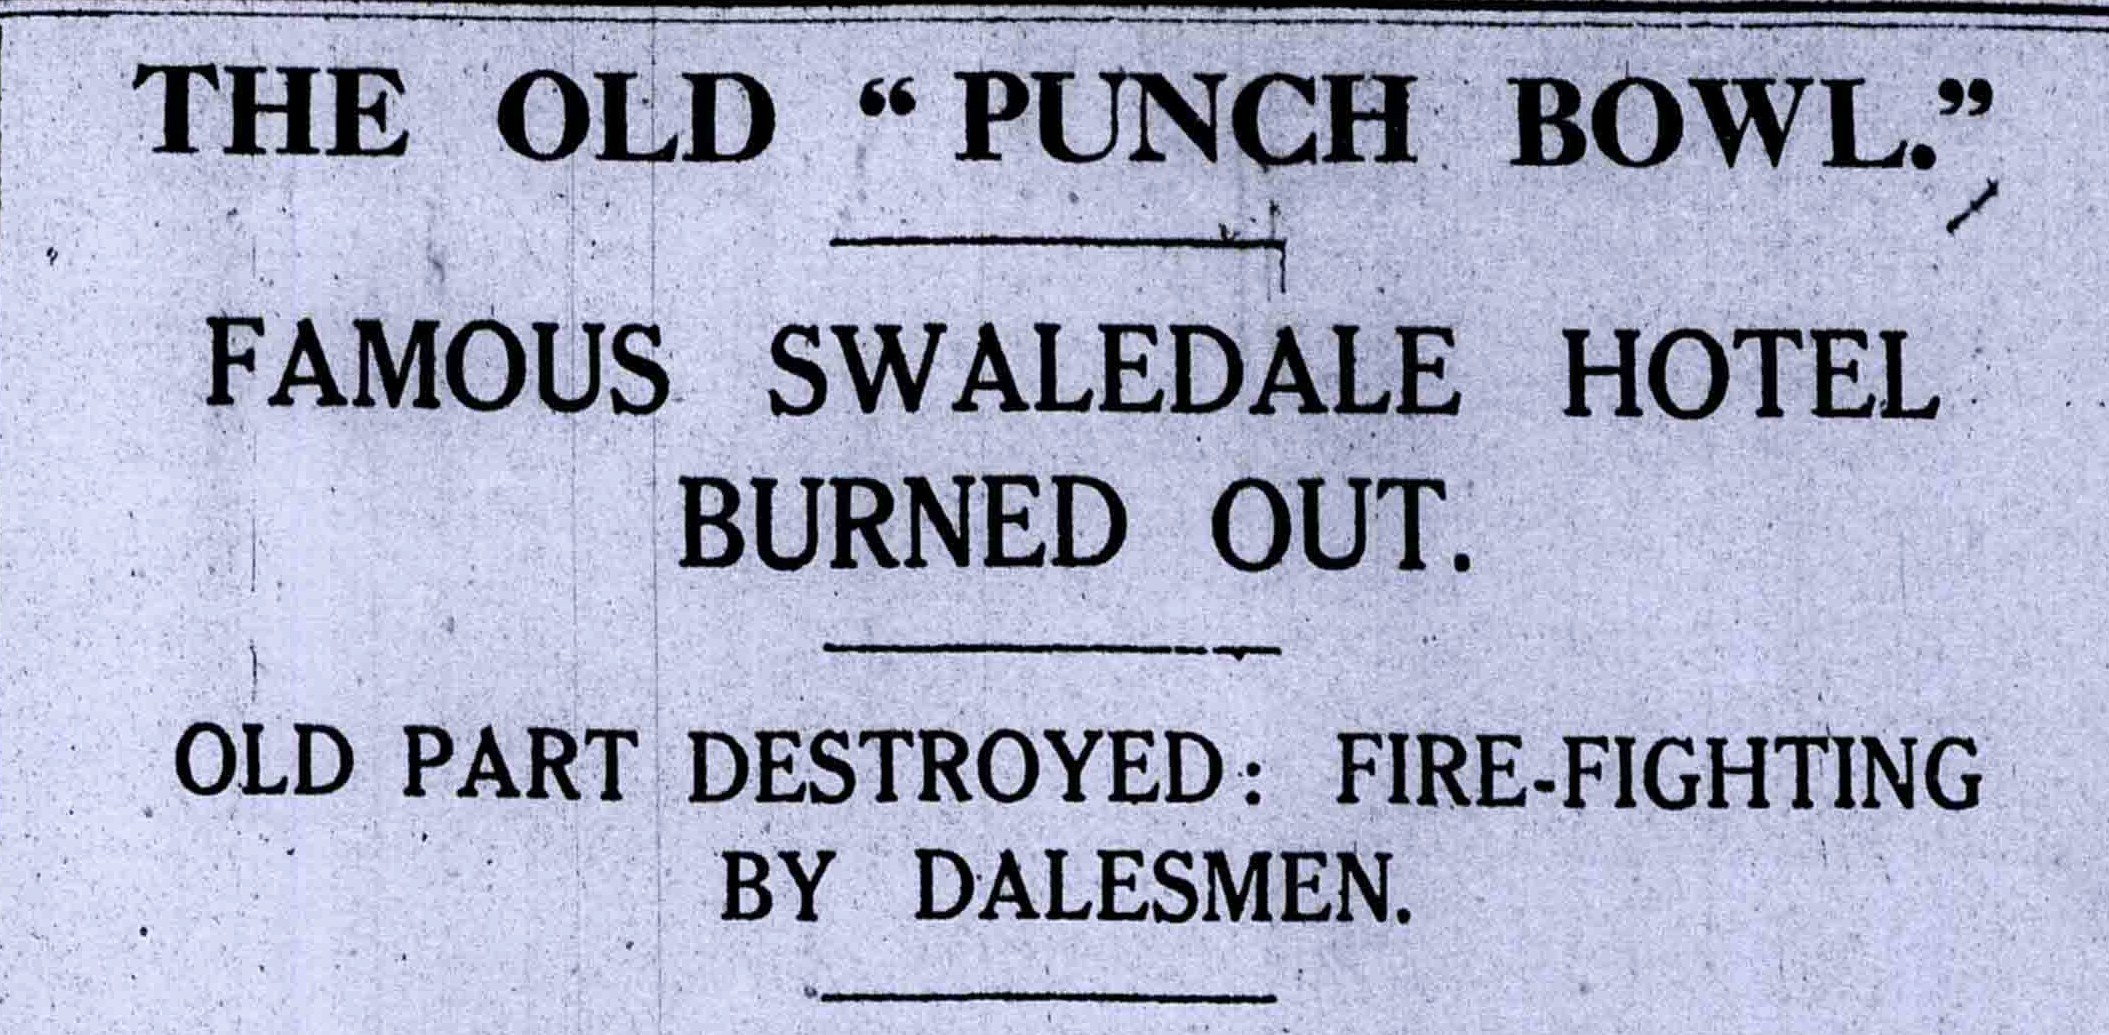 The D&S Times headline telling of the events of 93 years ago next Monday